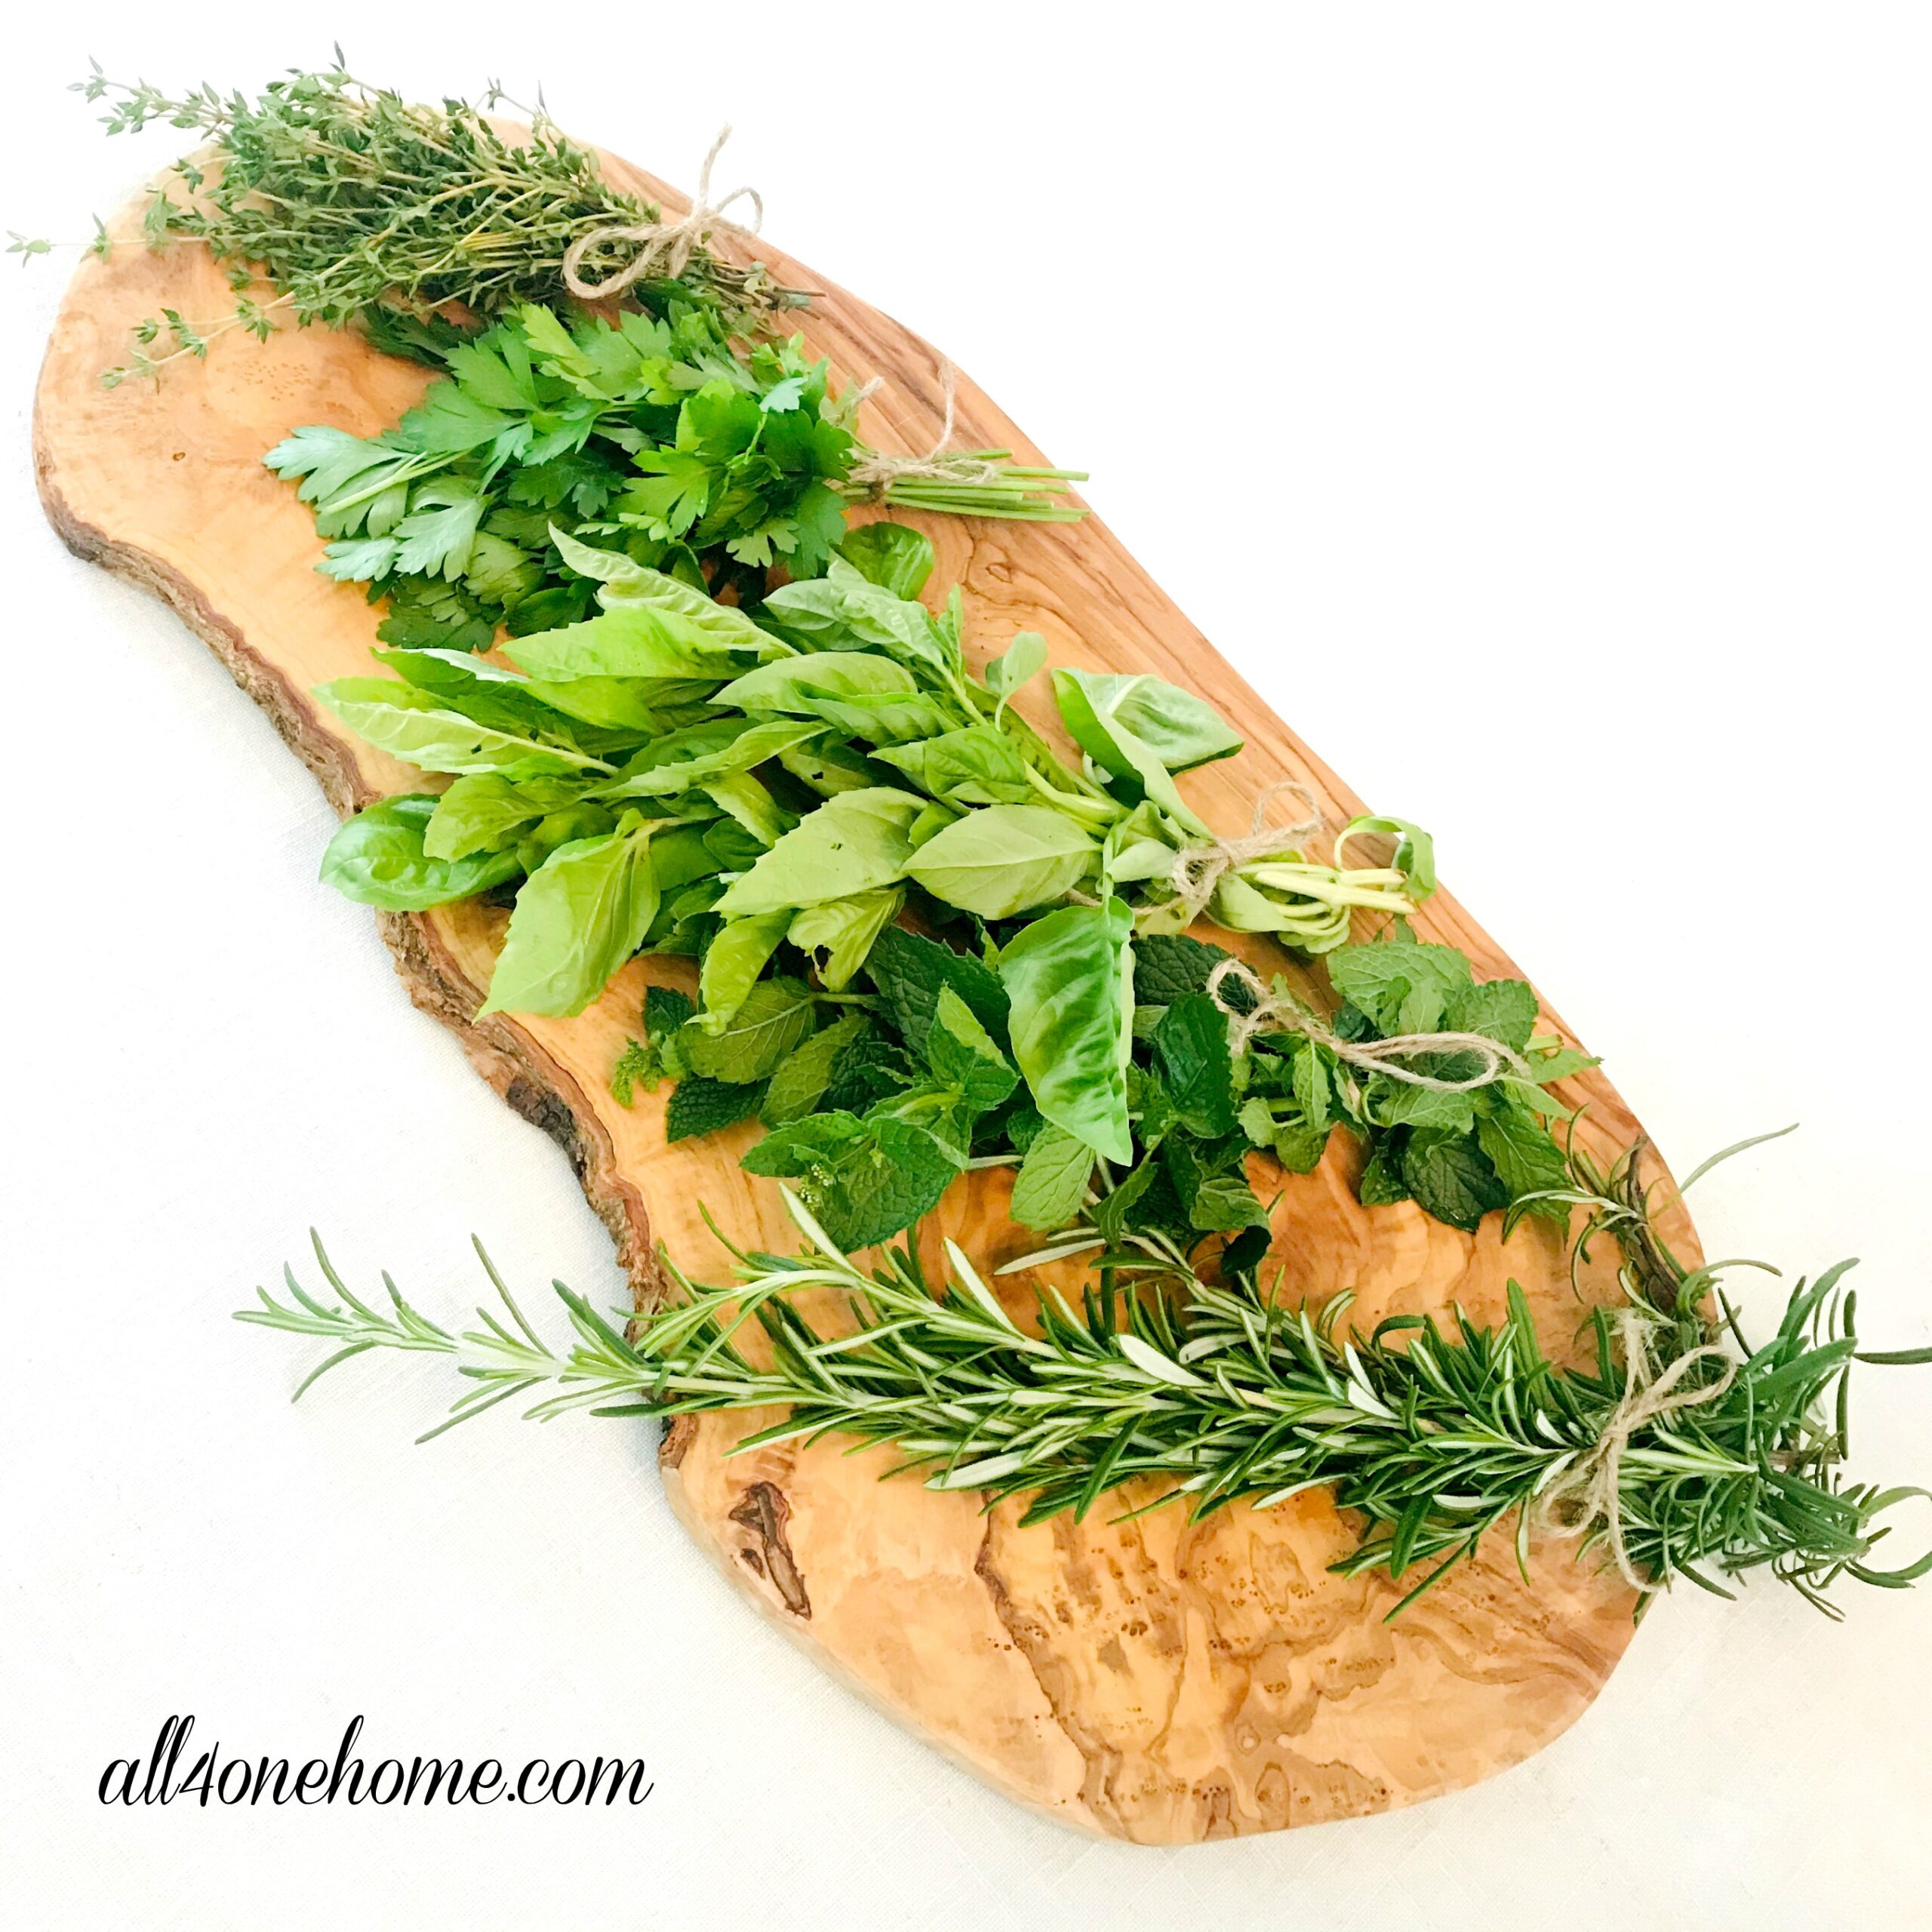 How to air dry herbs